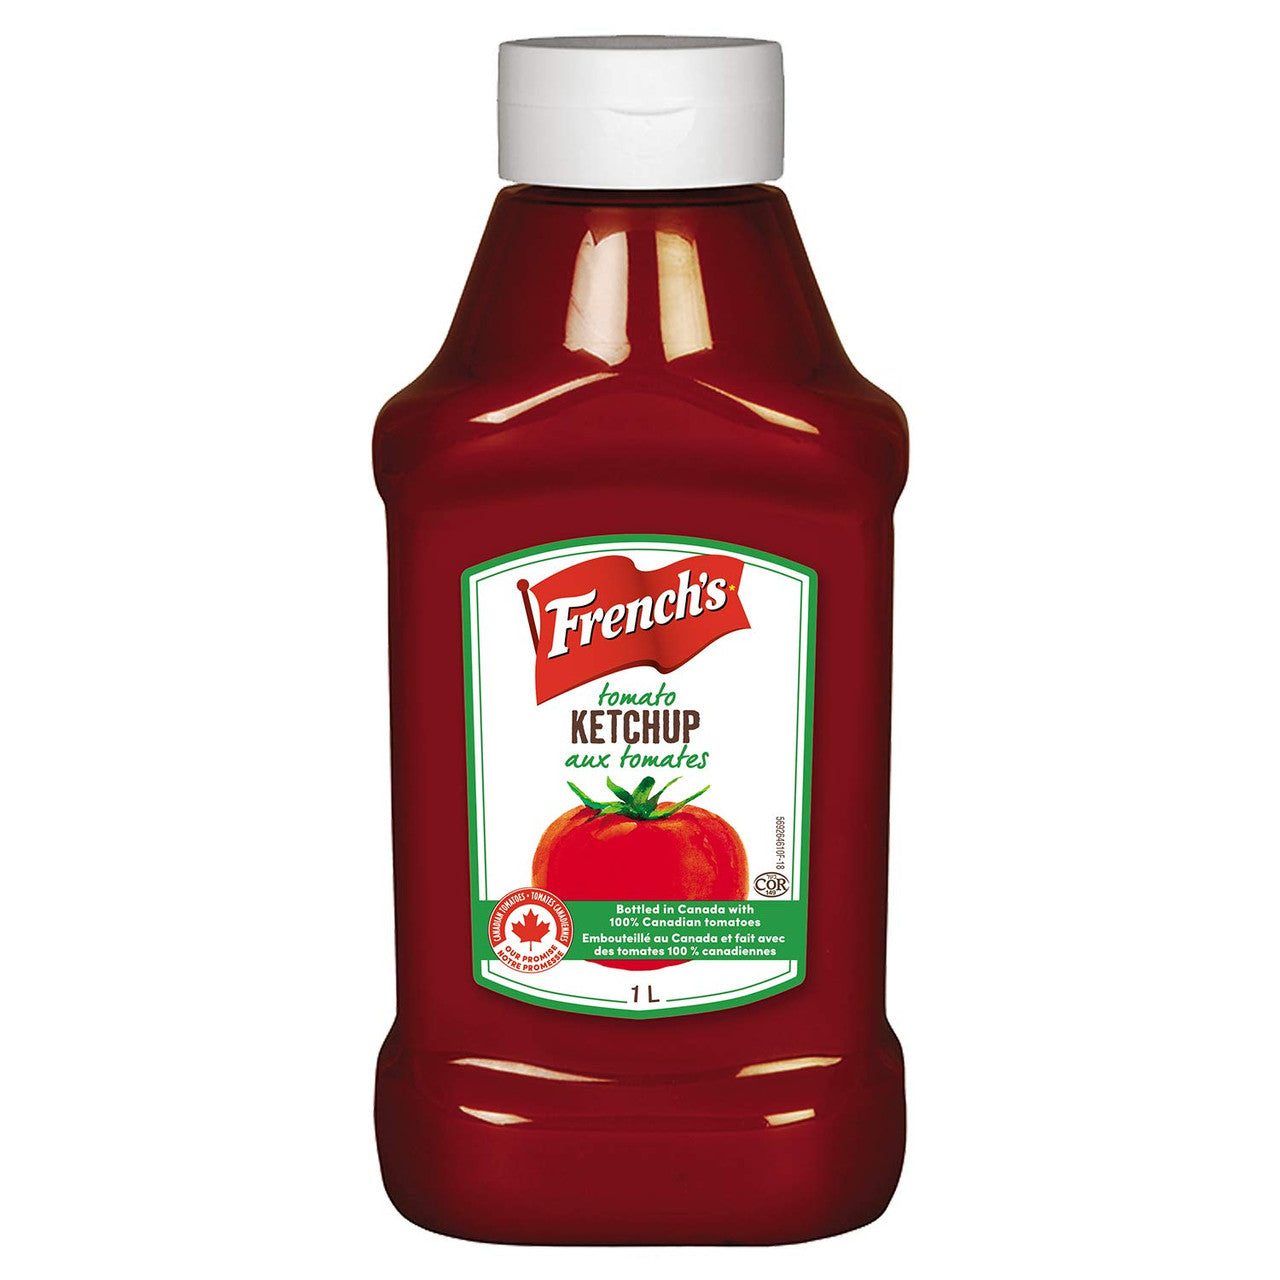 French's, Tomato Ketchup, 1L/33.8 fl.oz., {Imported from Canada}